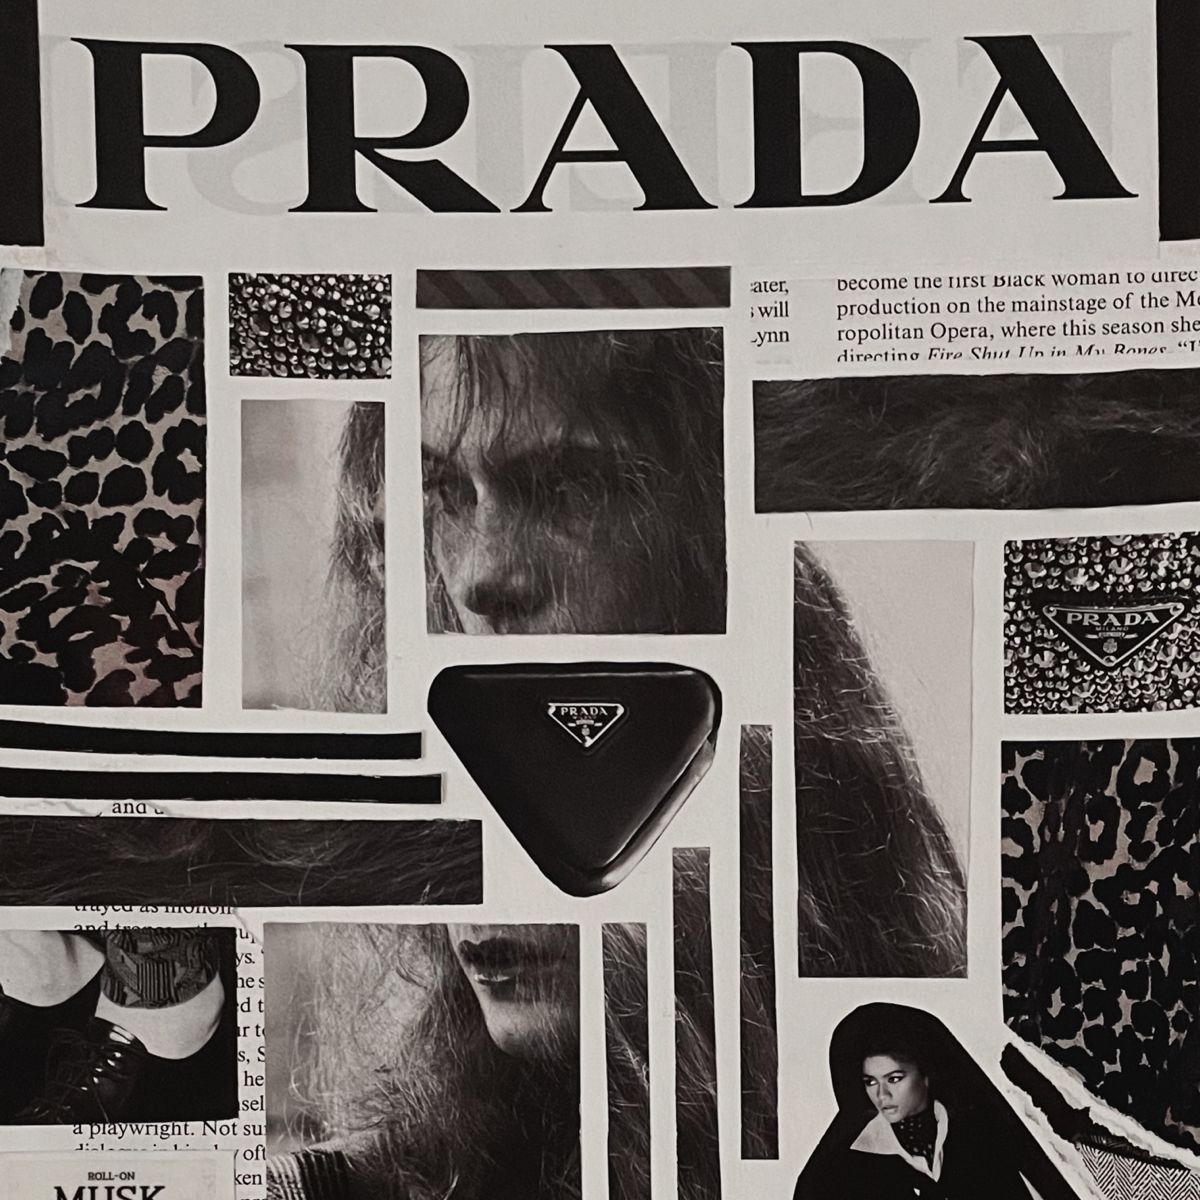 Prada's Unconventional Innovation: Redefining Fashion Trends with 'Ugly Chic'